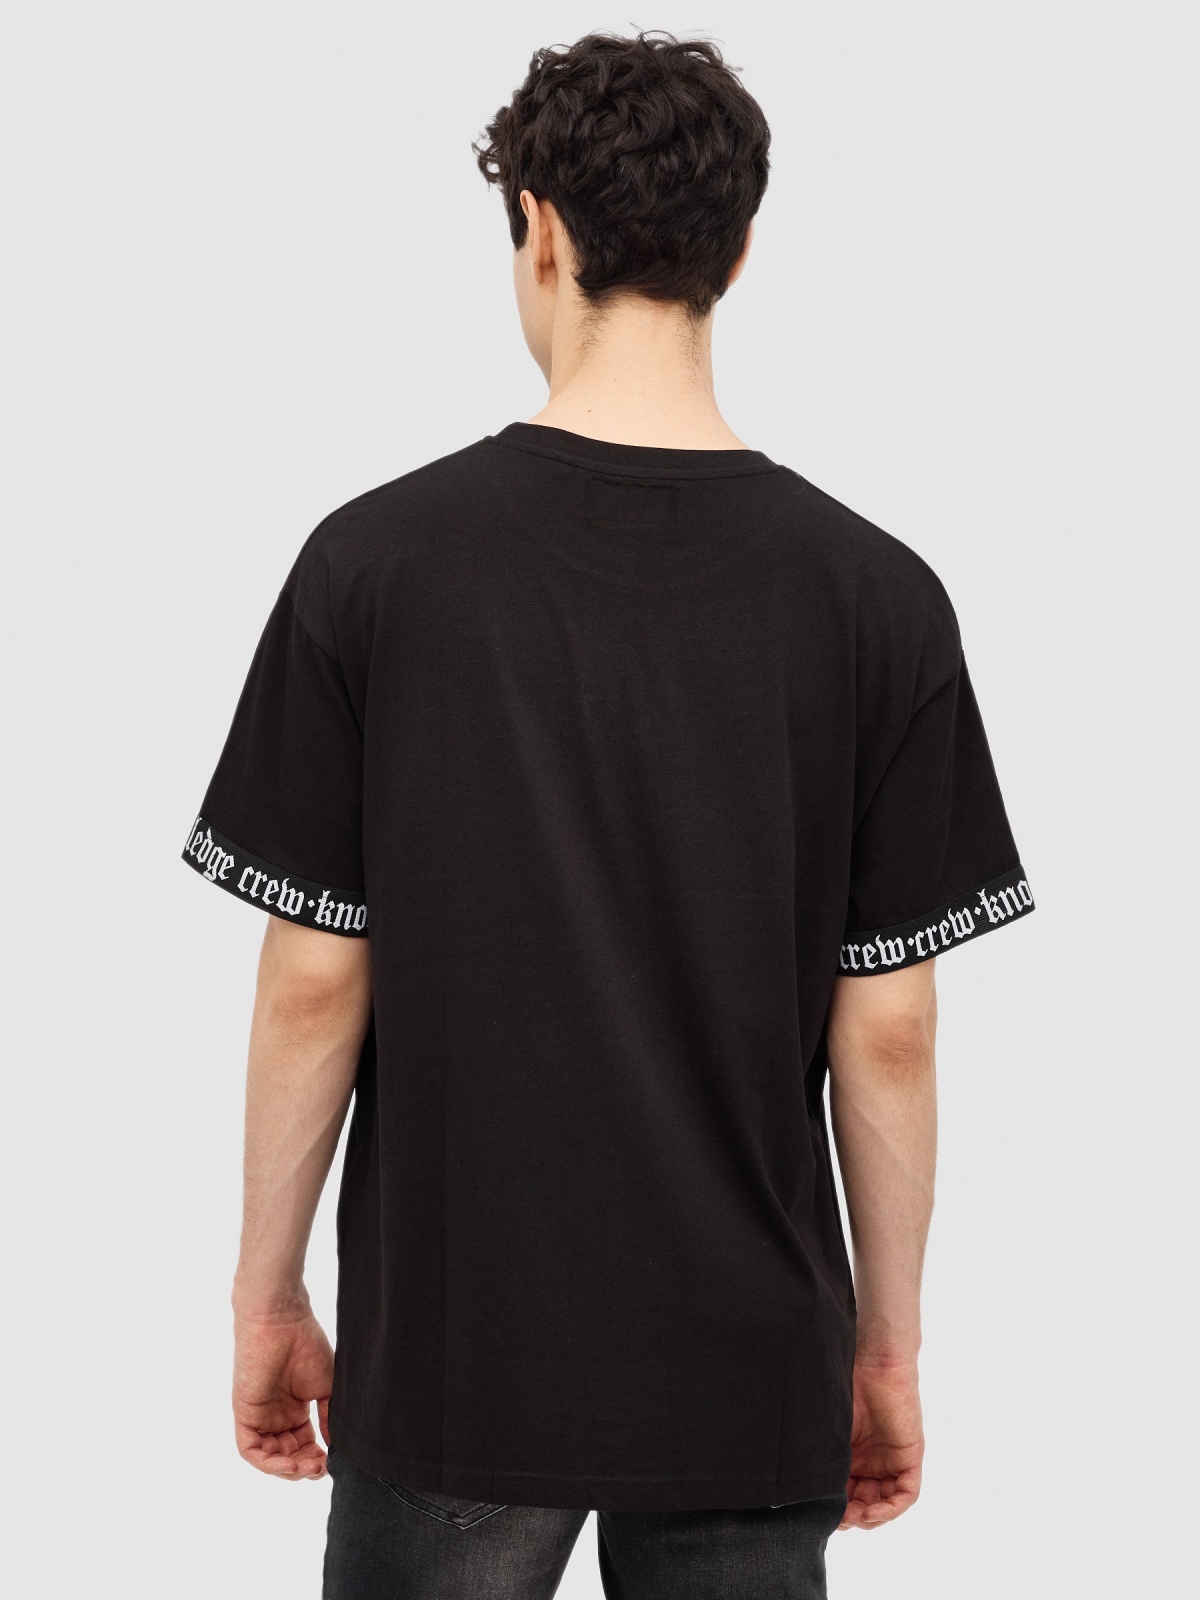 T-shirt with elastic cuffs black middle back view